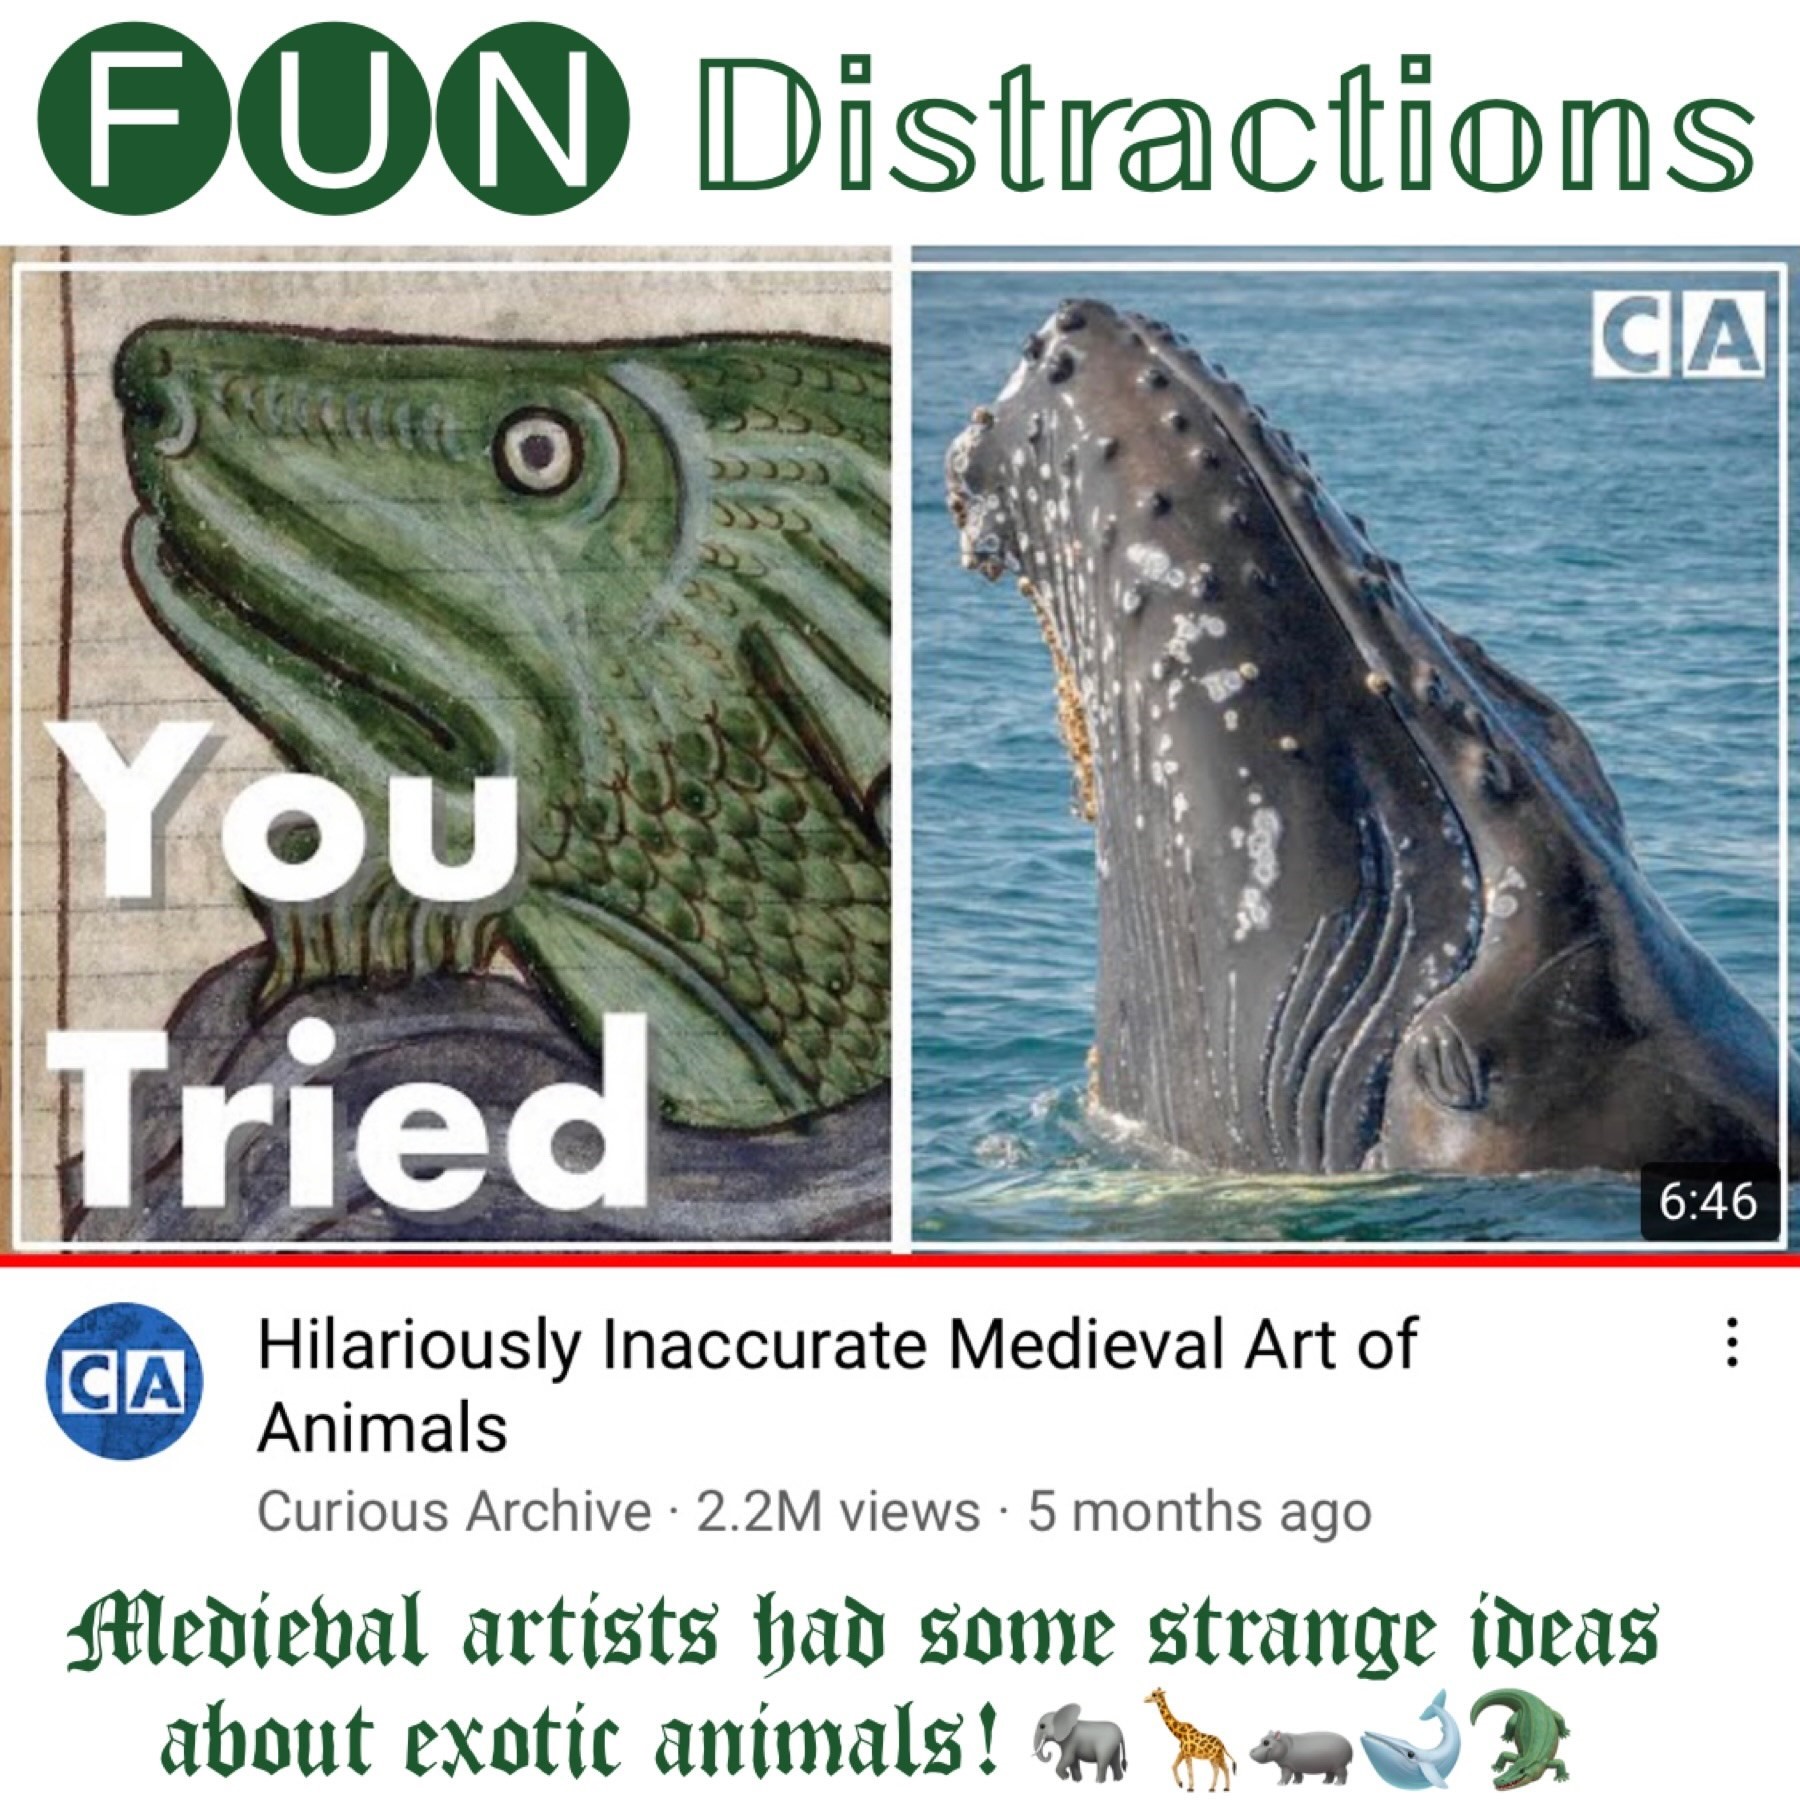 Image advertising the Library’s FUN Distractions series post about animals in medieval art